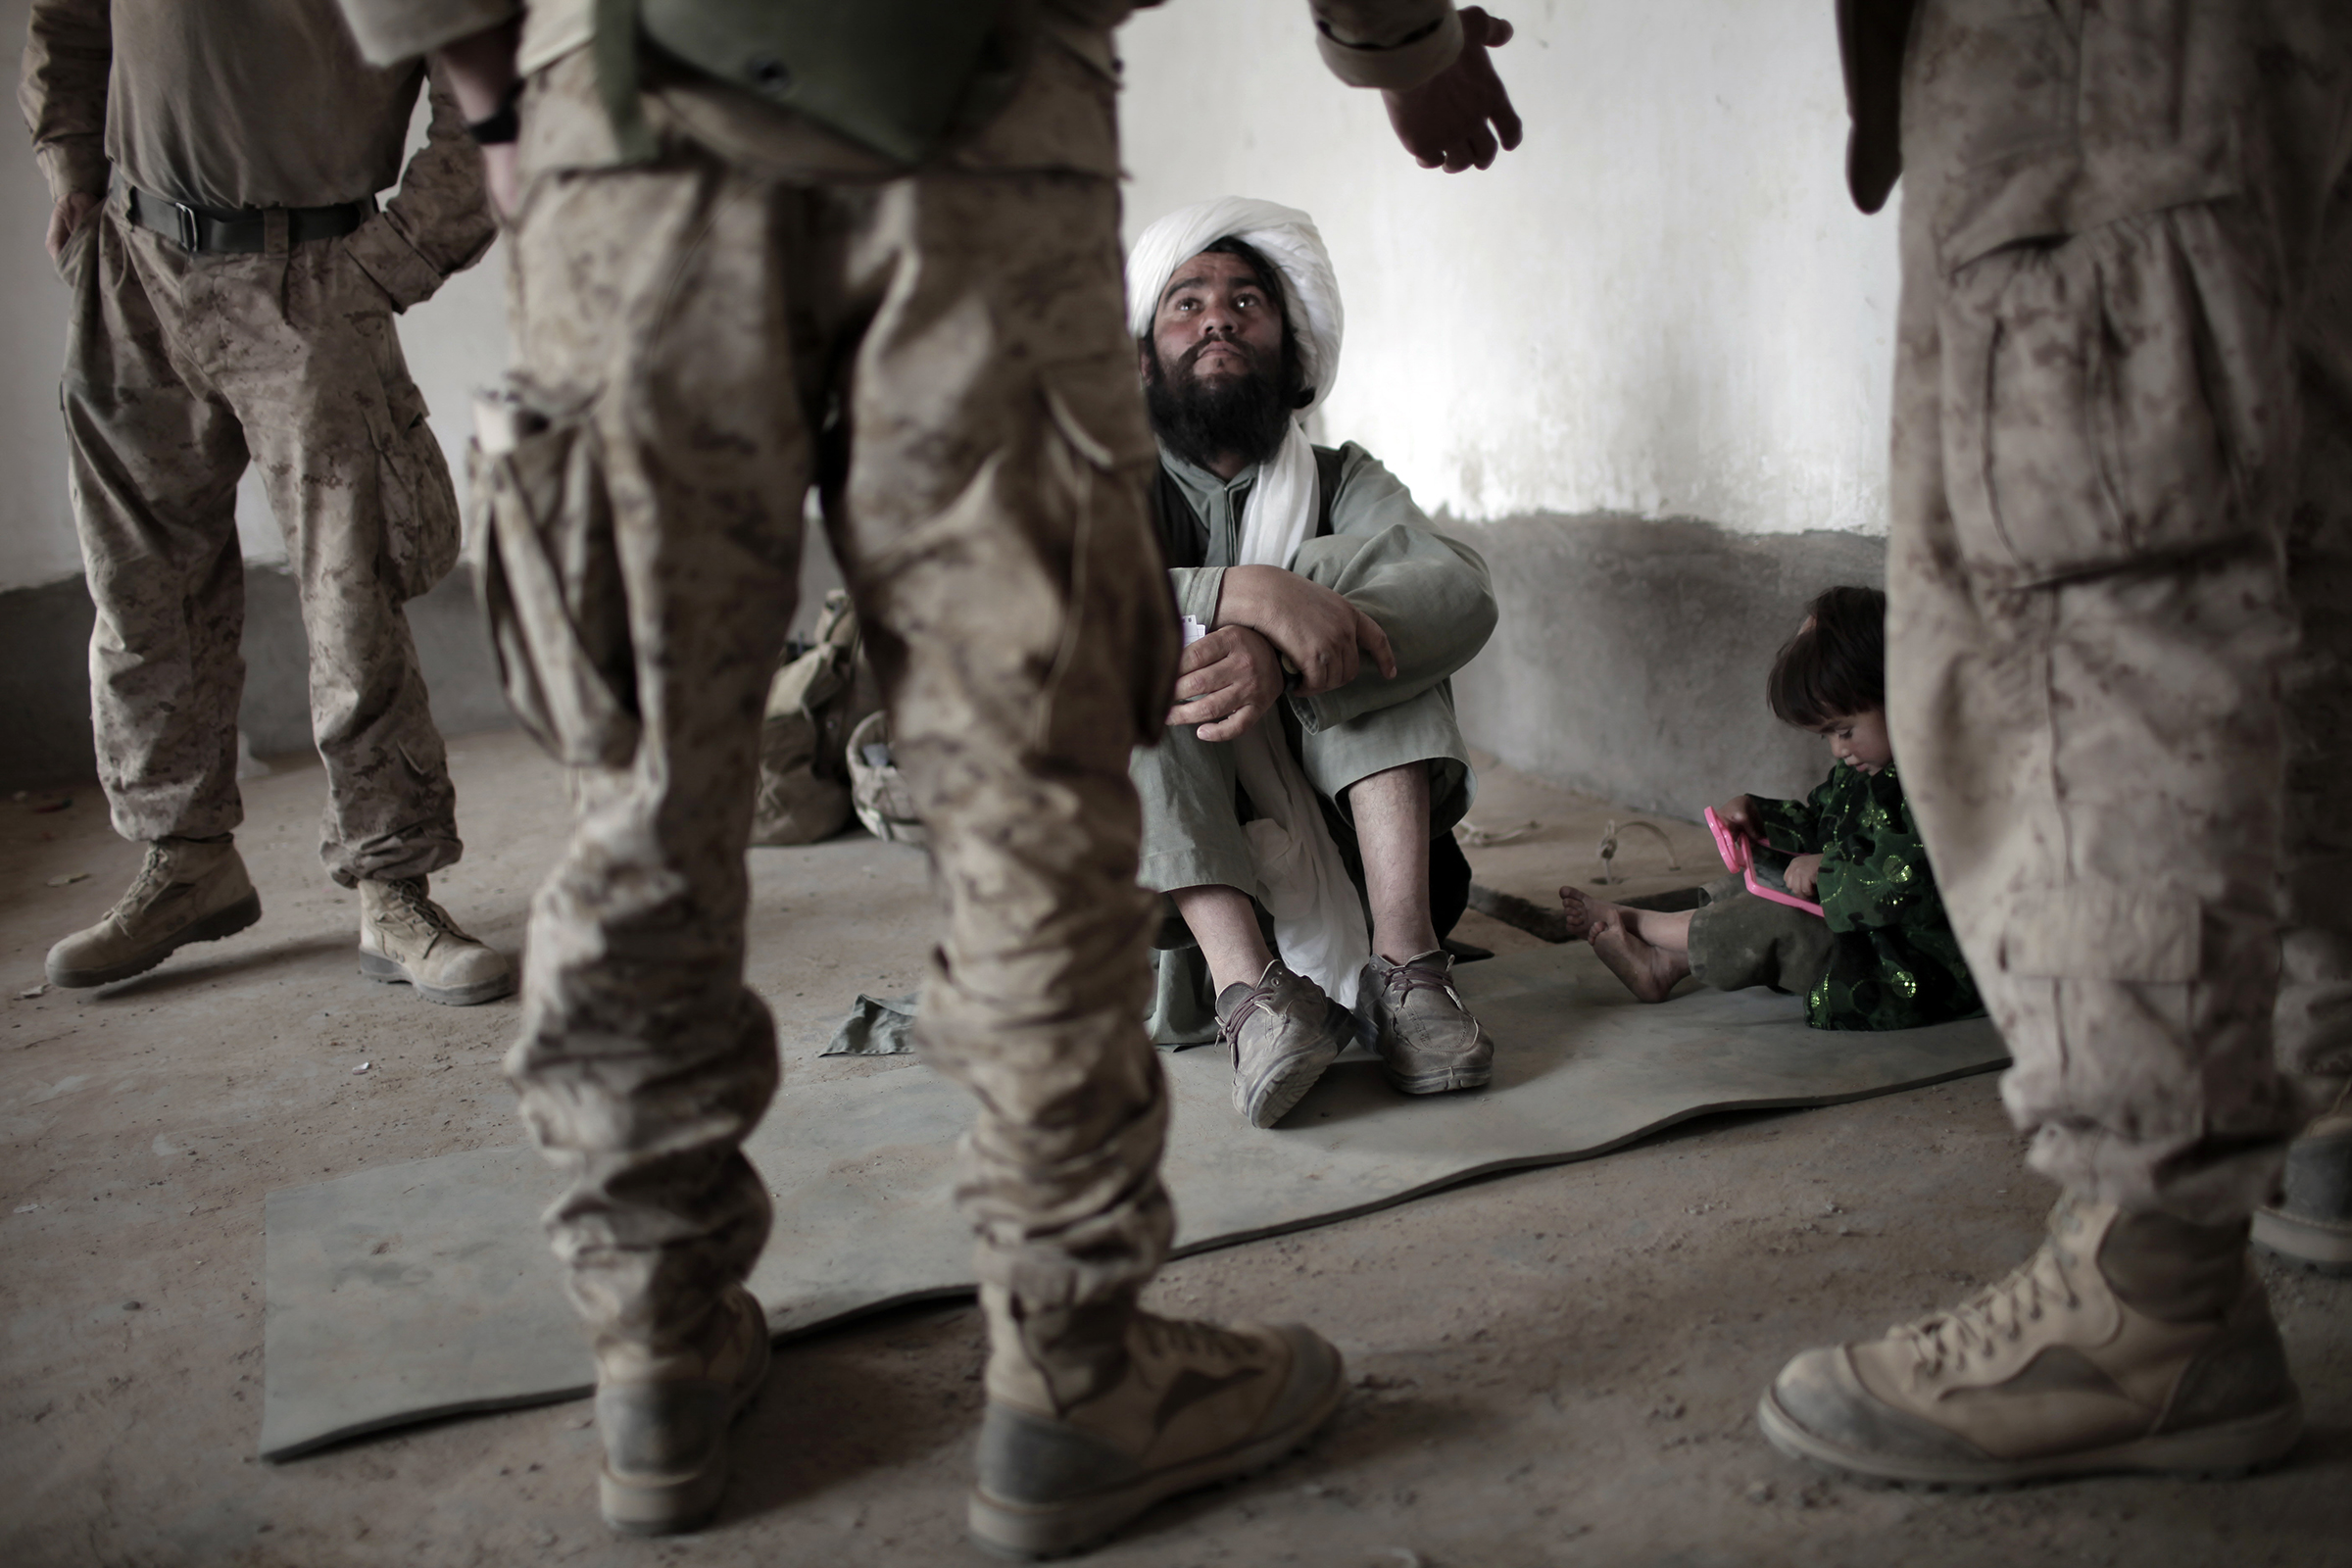 An imam listens to an interpreter for U.S. forces in Marjah, southern Afghanistan, in 2010.